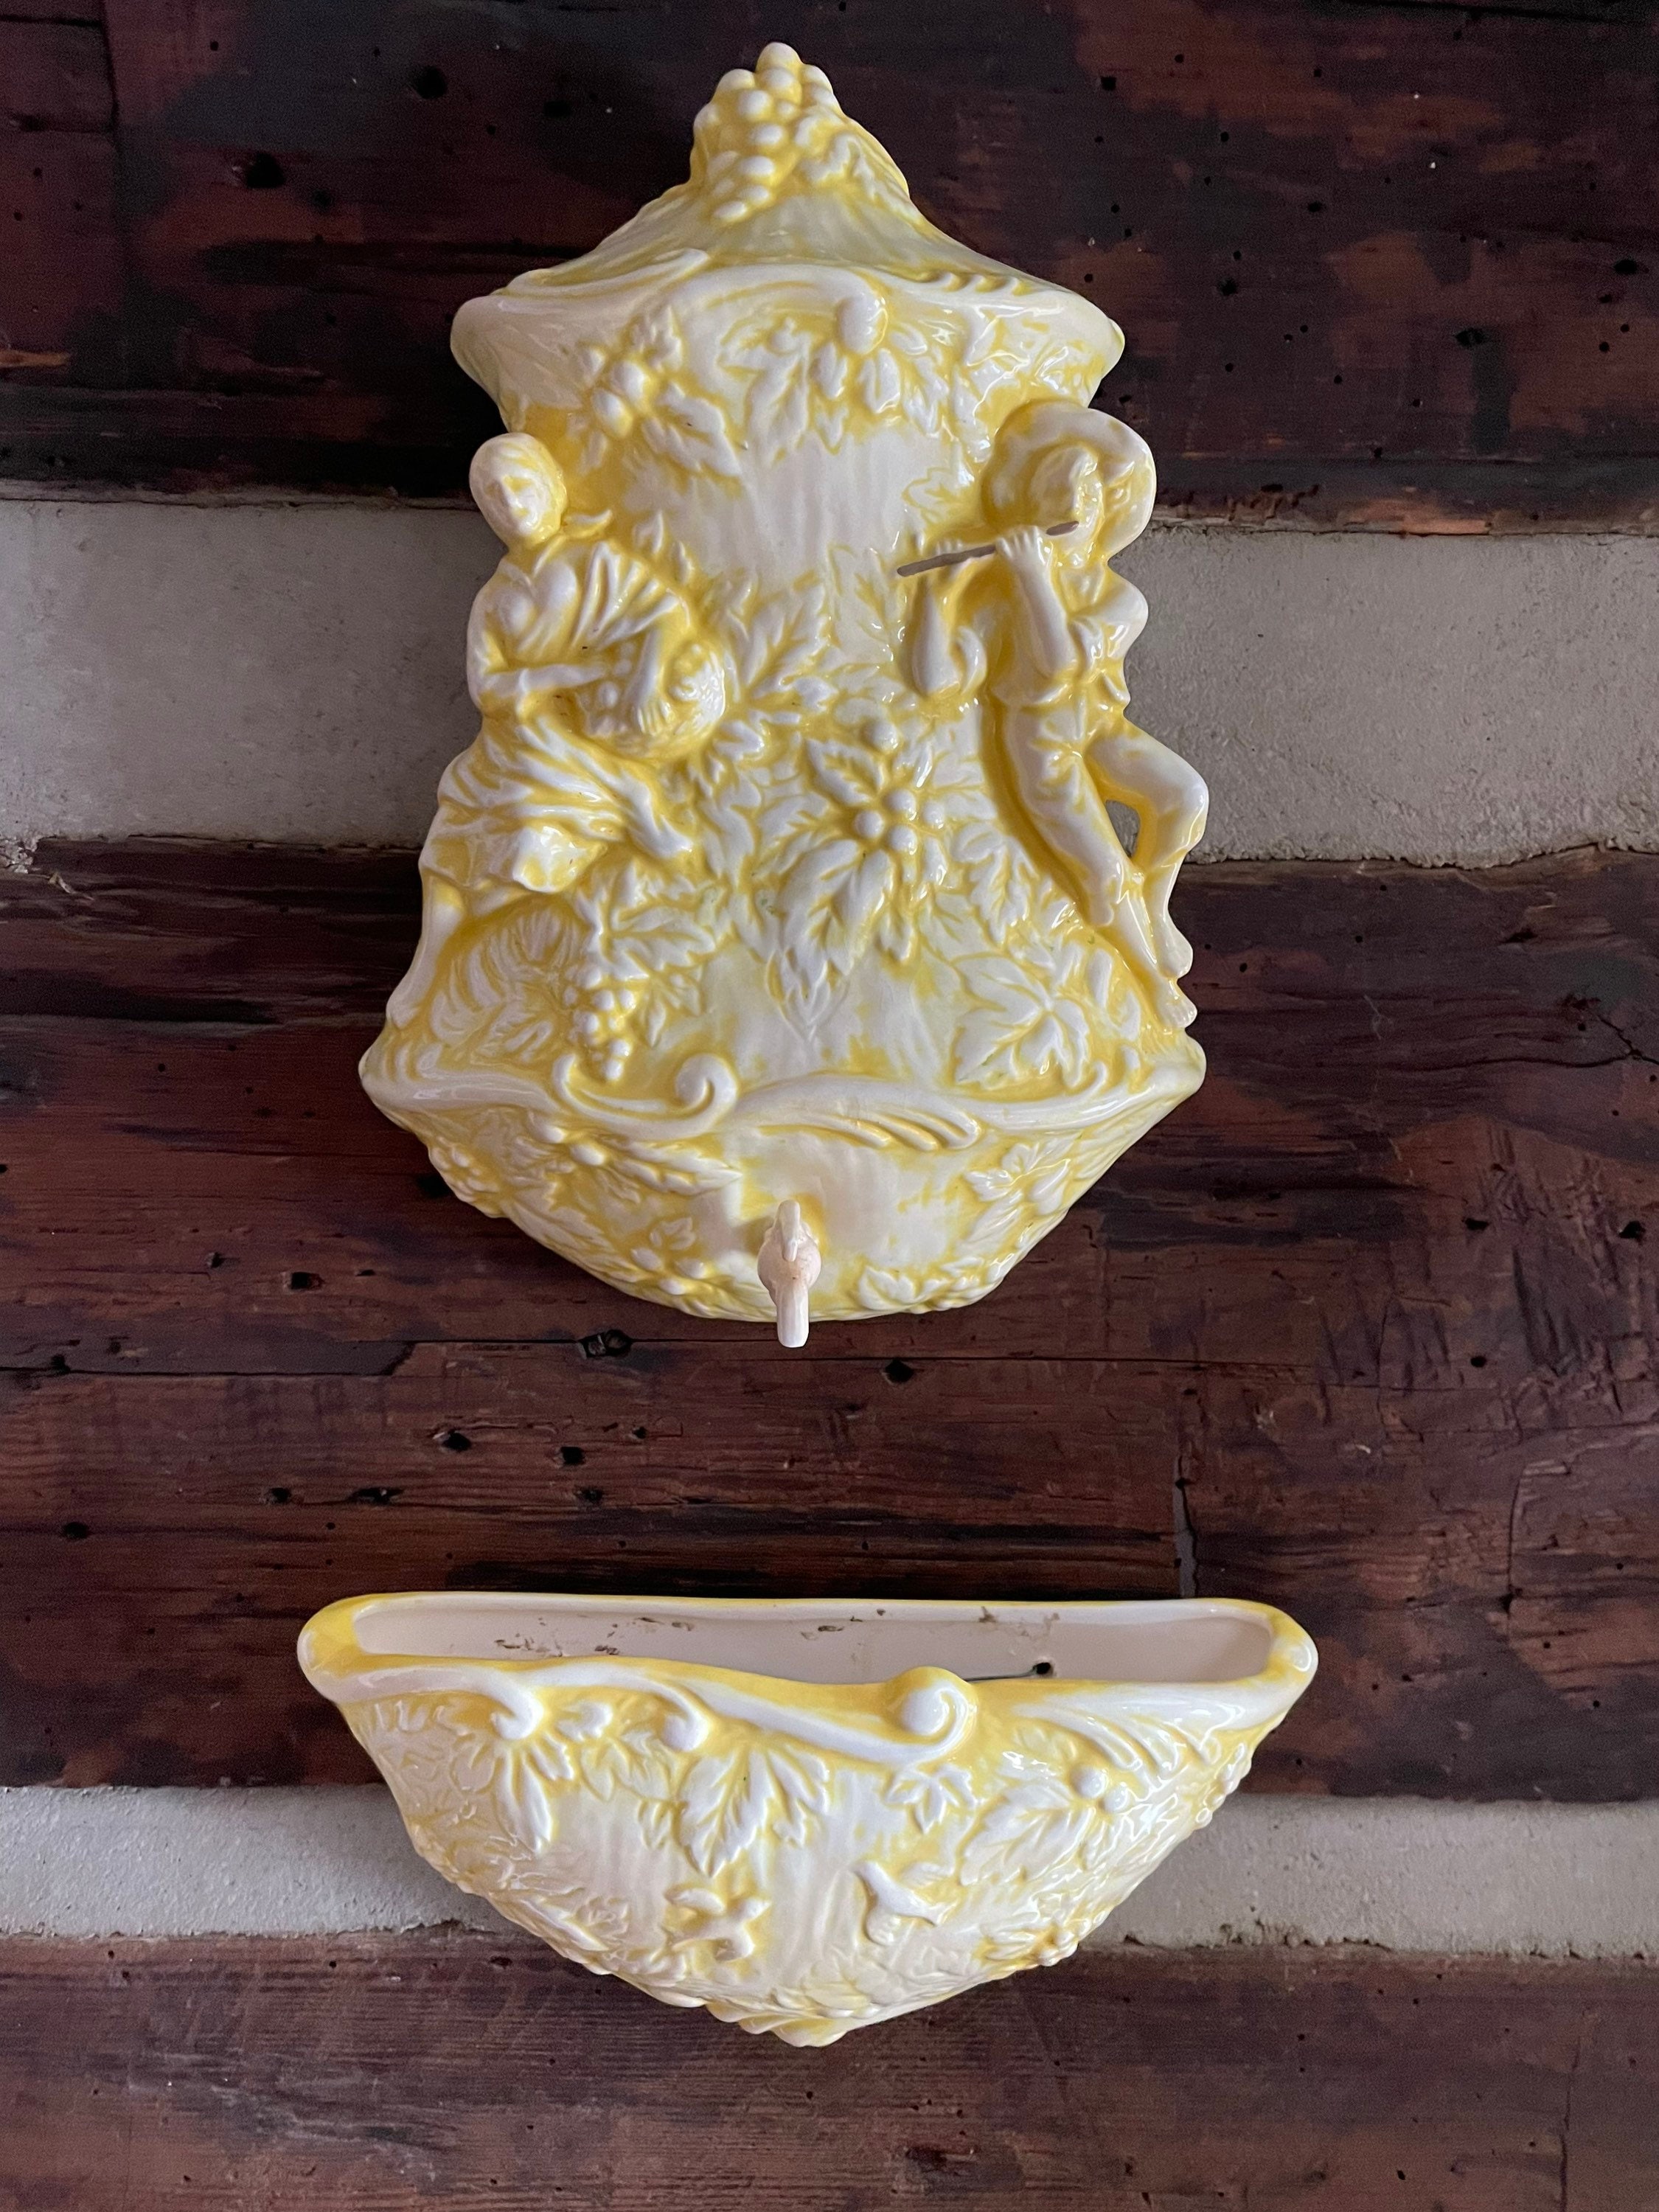 Pair Made in Italy Molds, Bassano Ceramiche Molds, Hand Painted Molds,  Italian Ceramic Molds, Decorative Molds, Hand Painted Porcelain Molds 